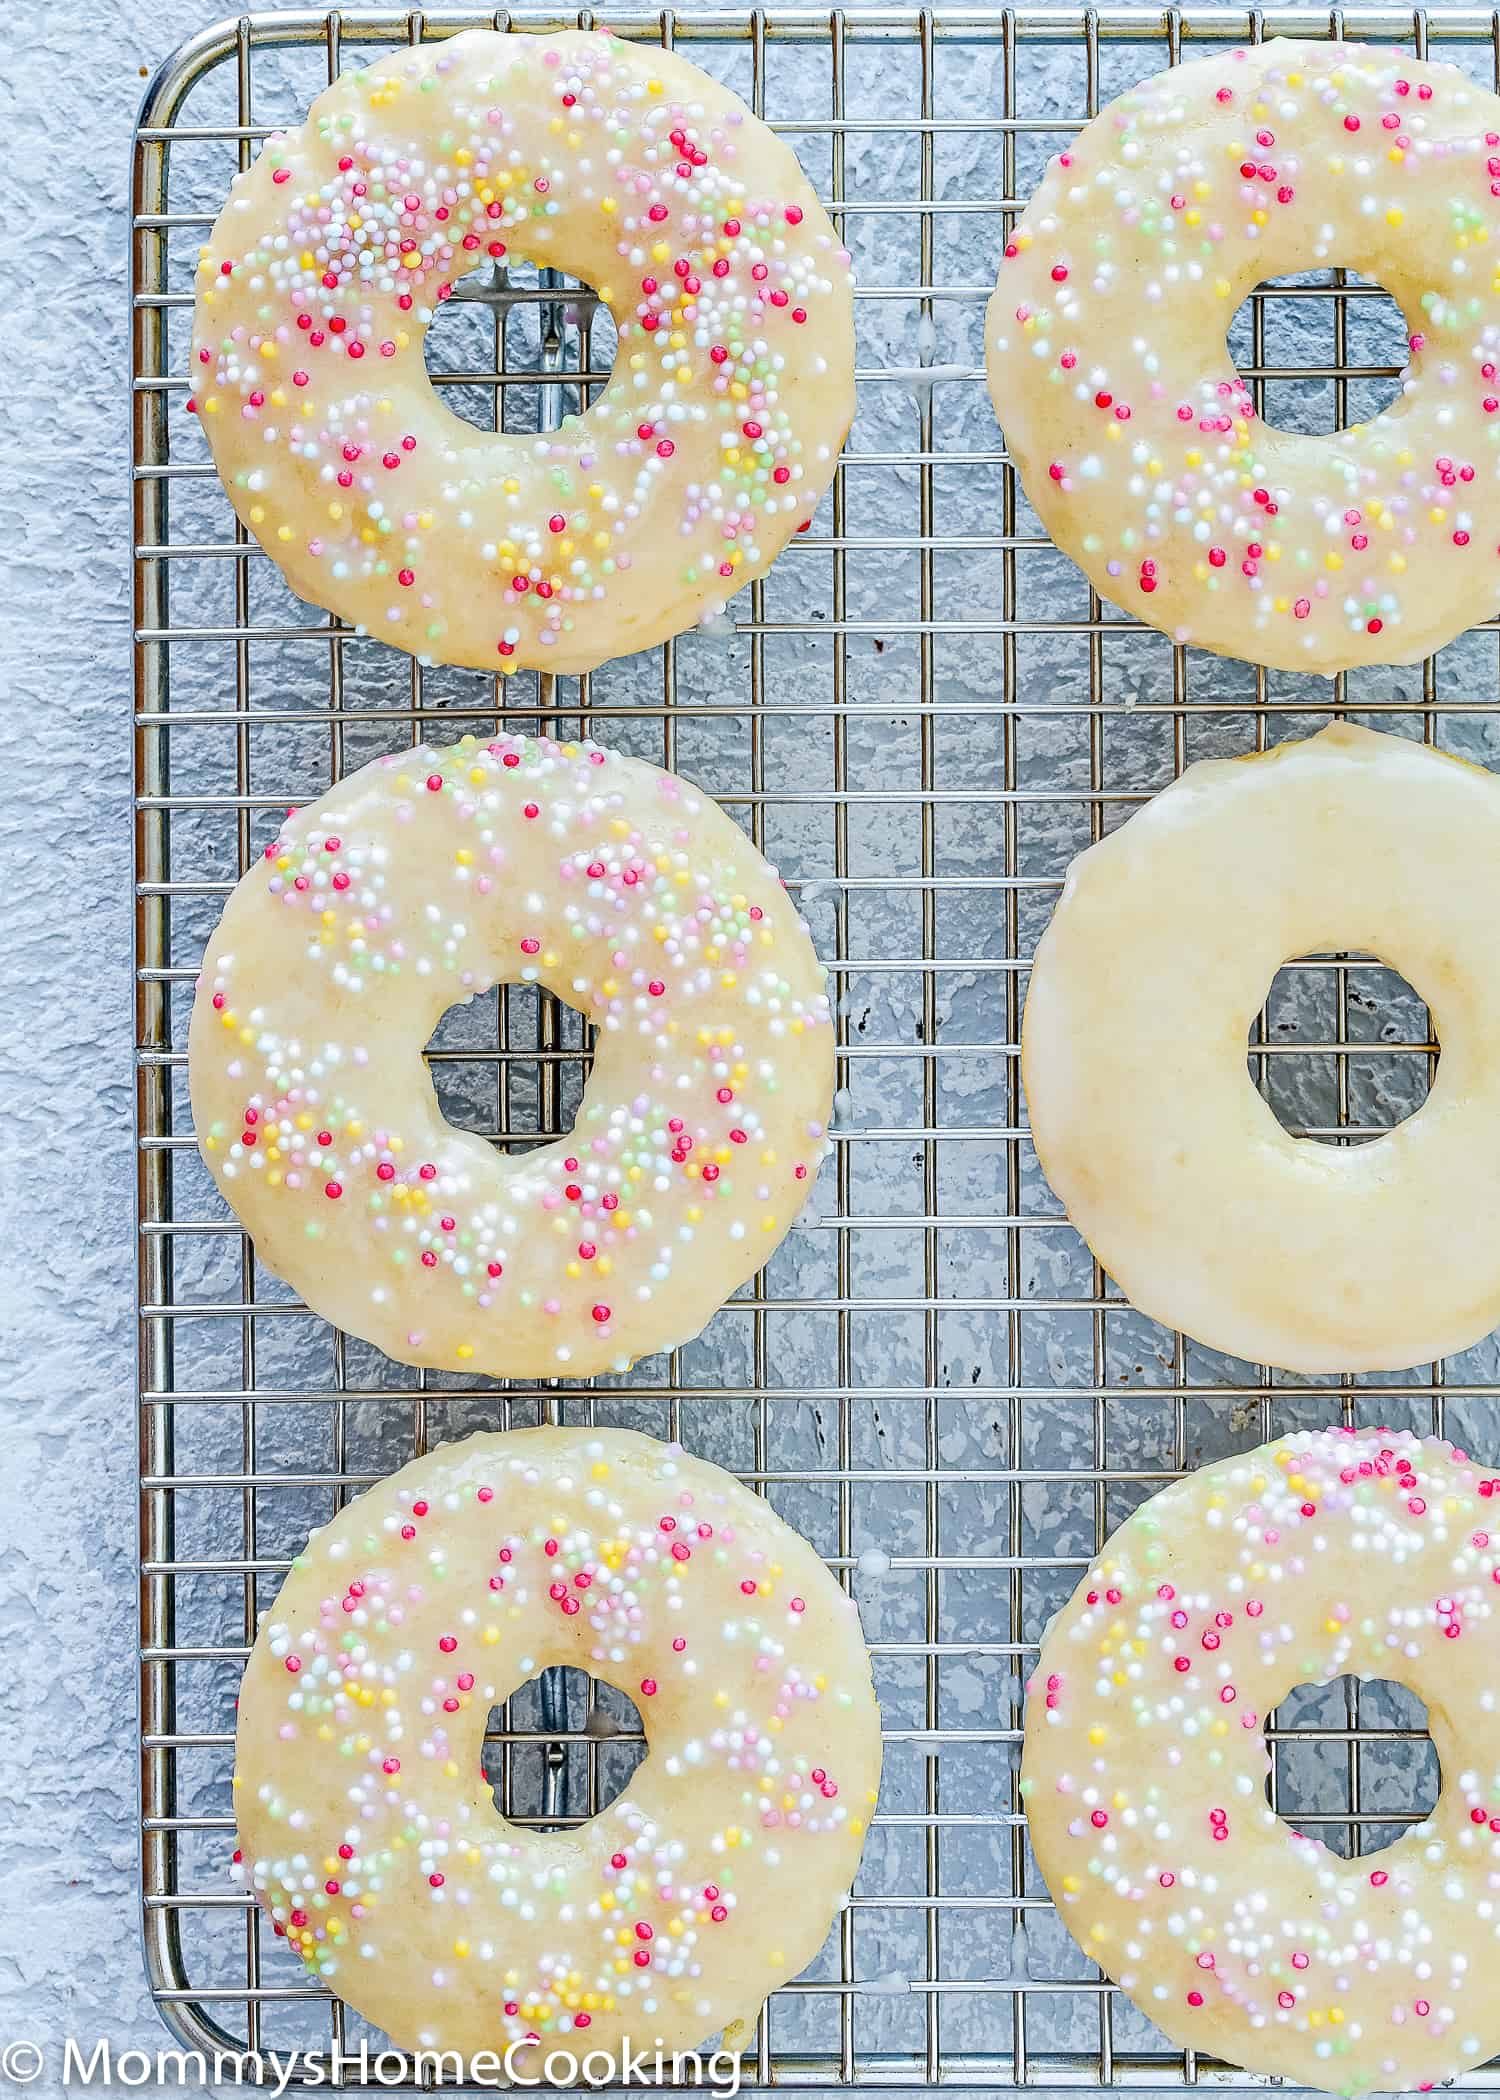 Overhead view of six glazed baked egg-free donuts with five with sprinkles on top.